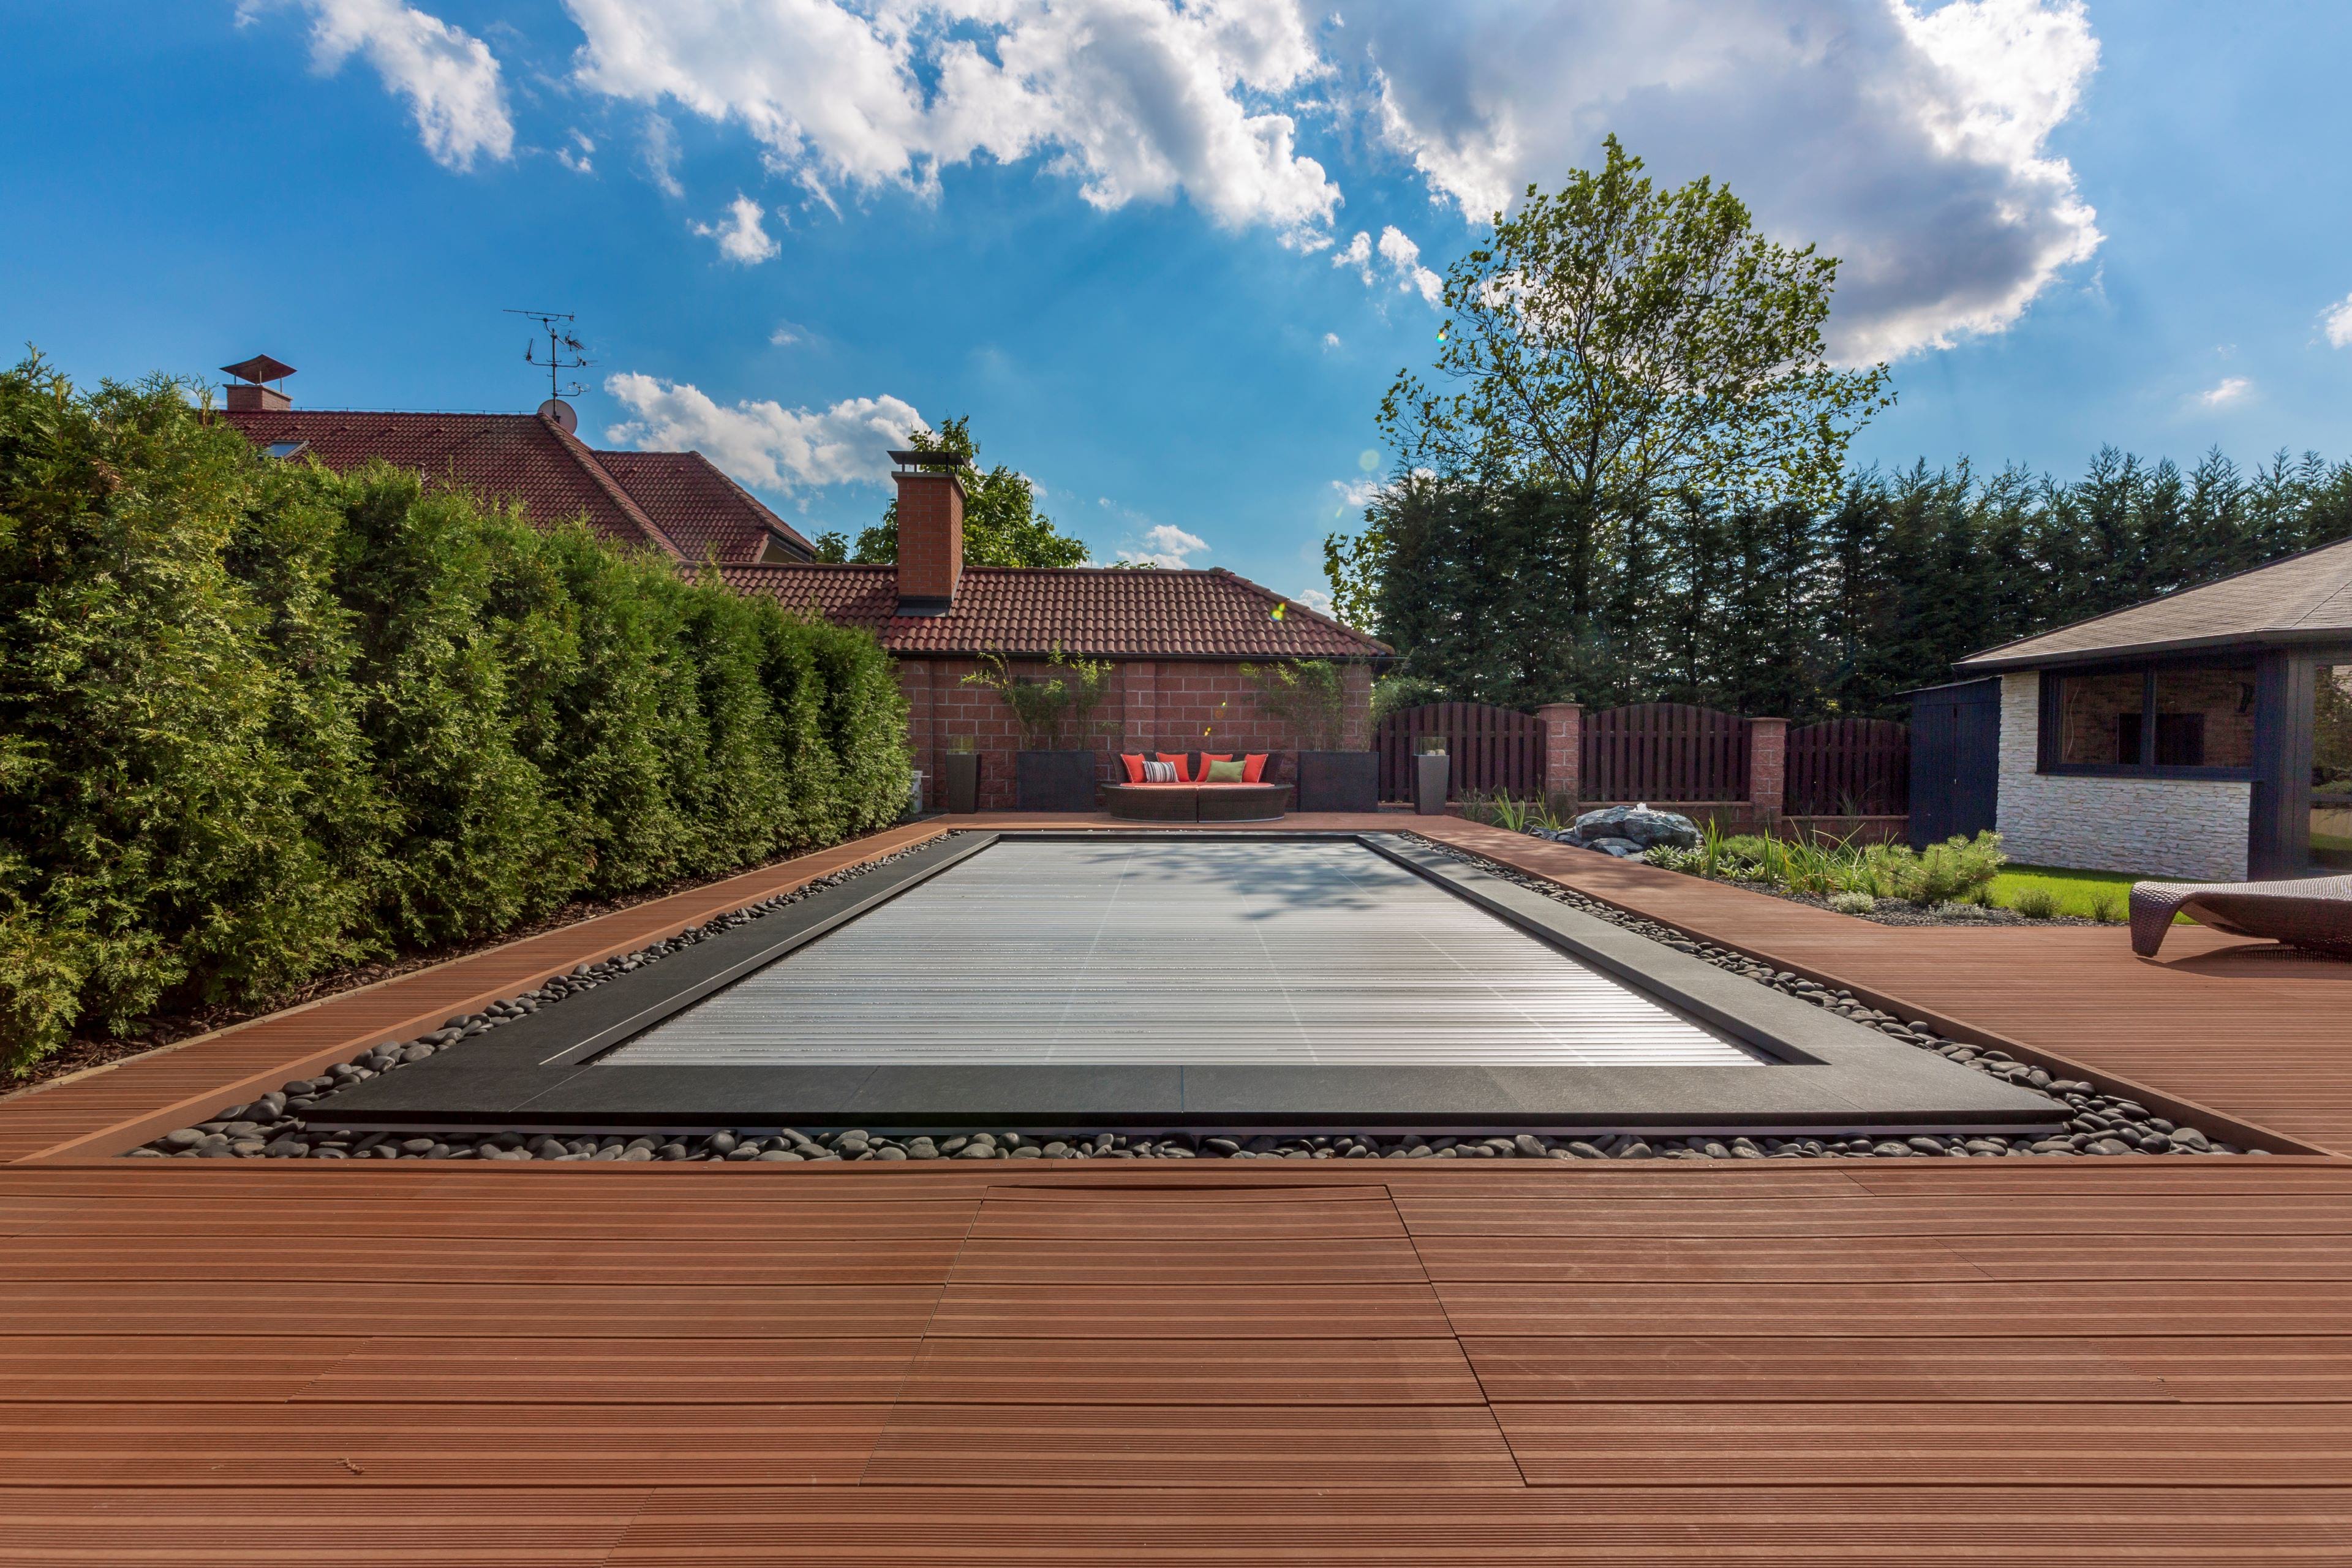 Stainless steel pool with pebble overflow